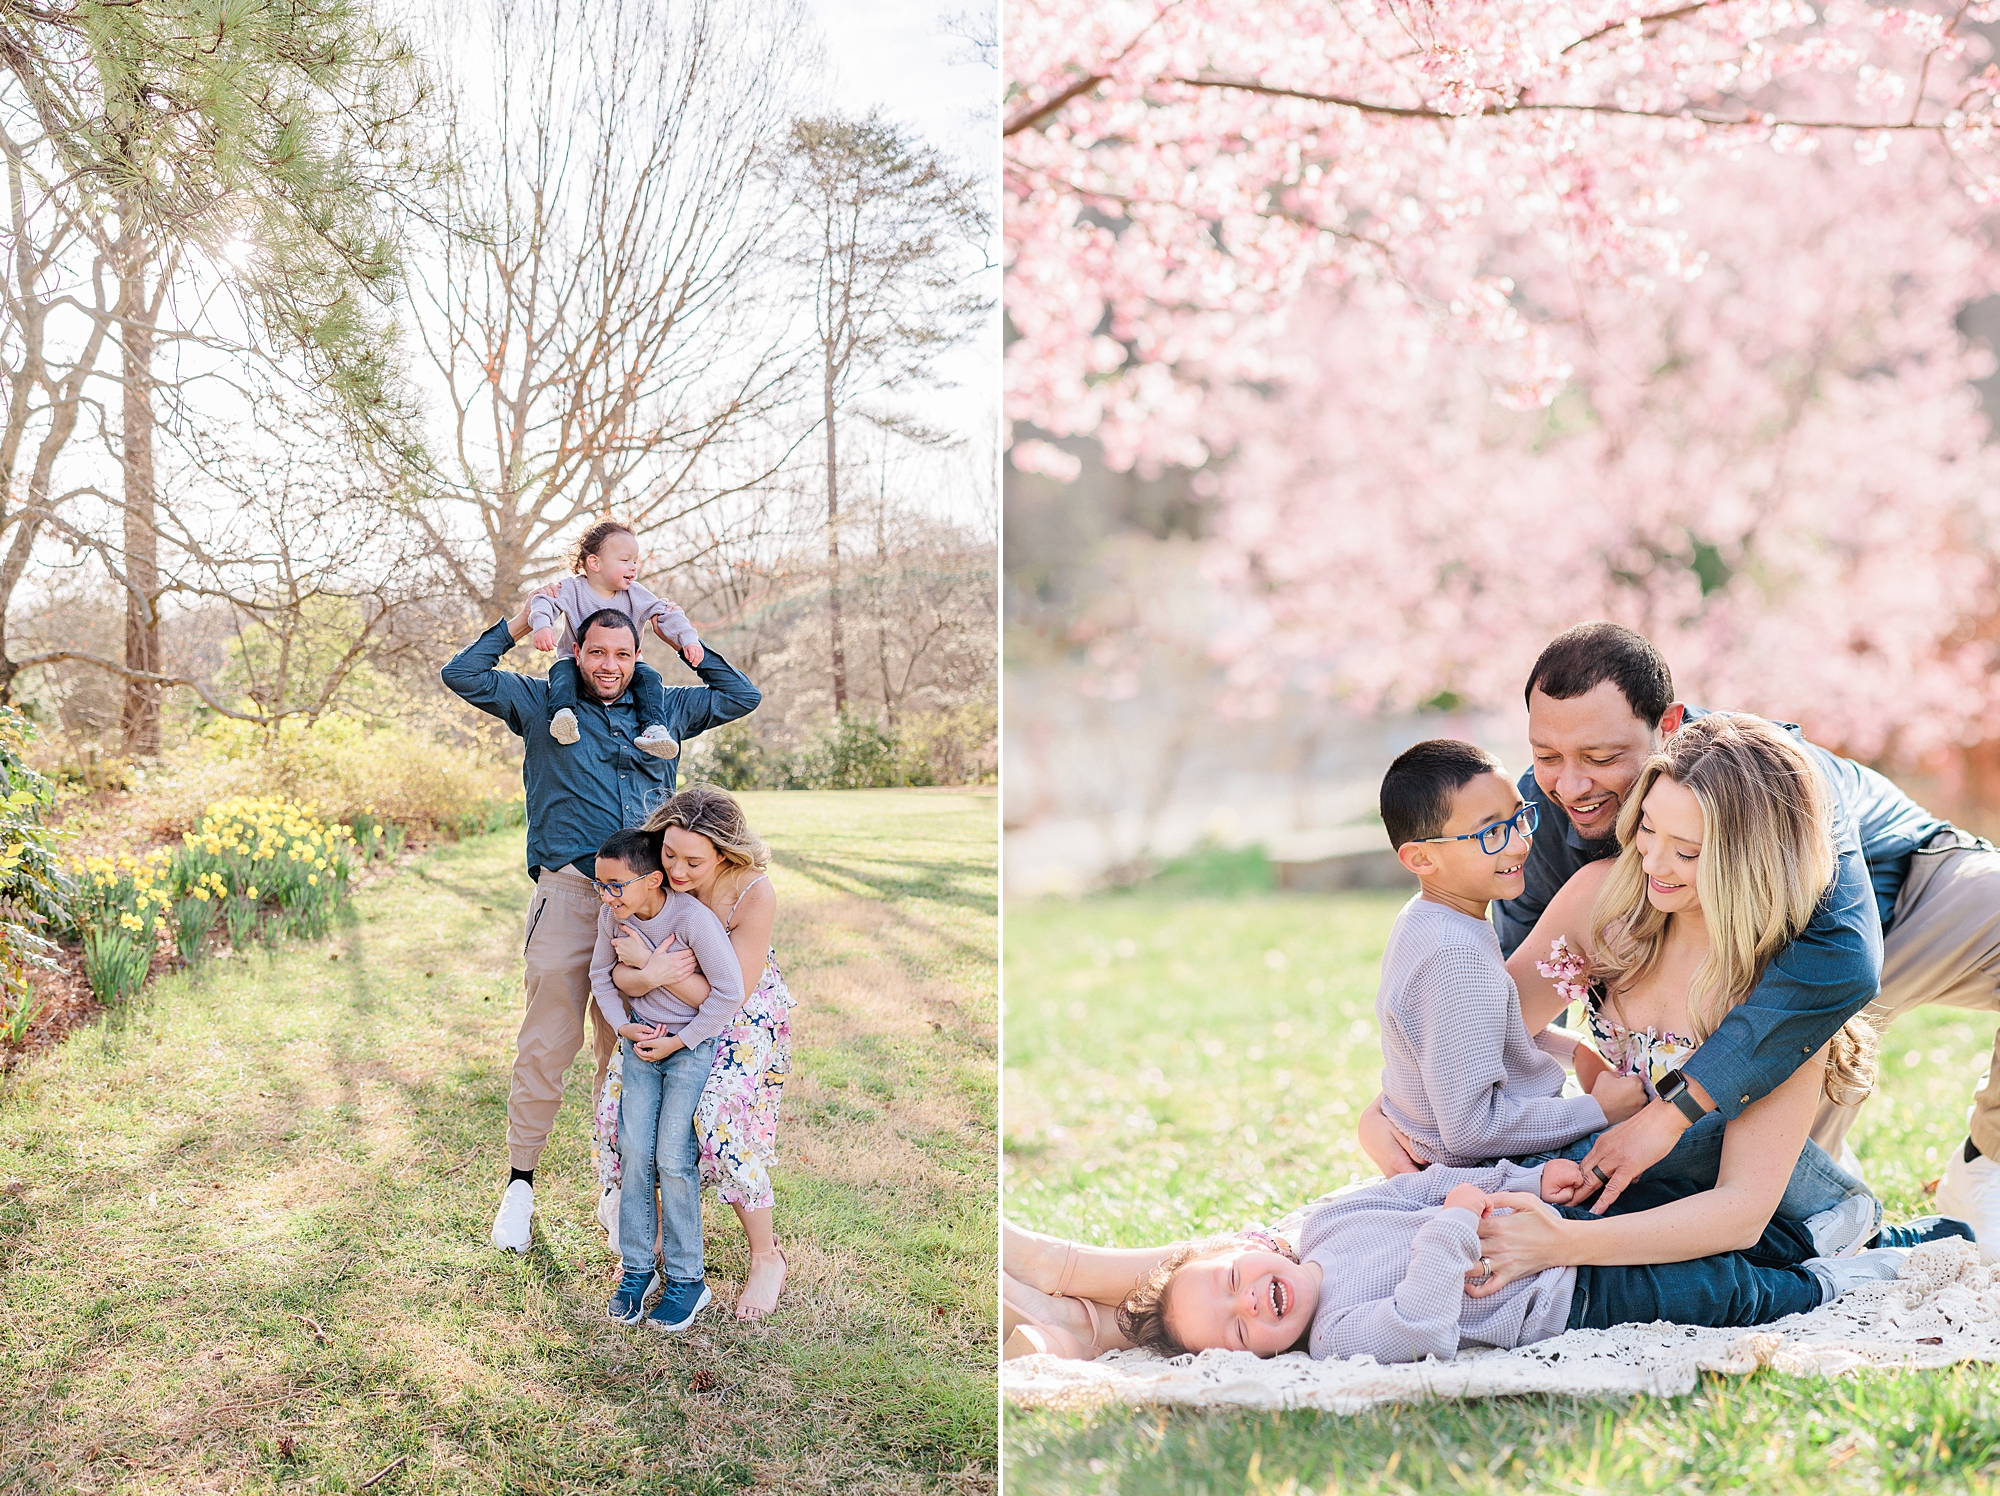 DMV family photographer shares why photography permits are important when planning your family photos - and what they mean!